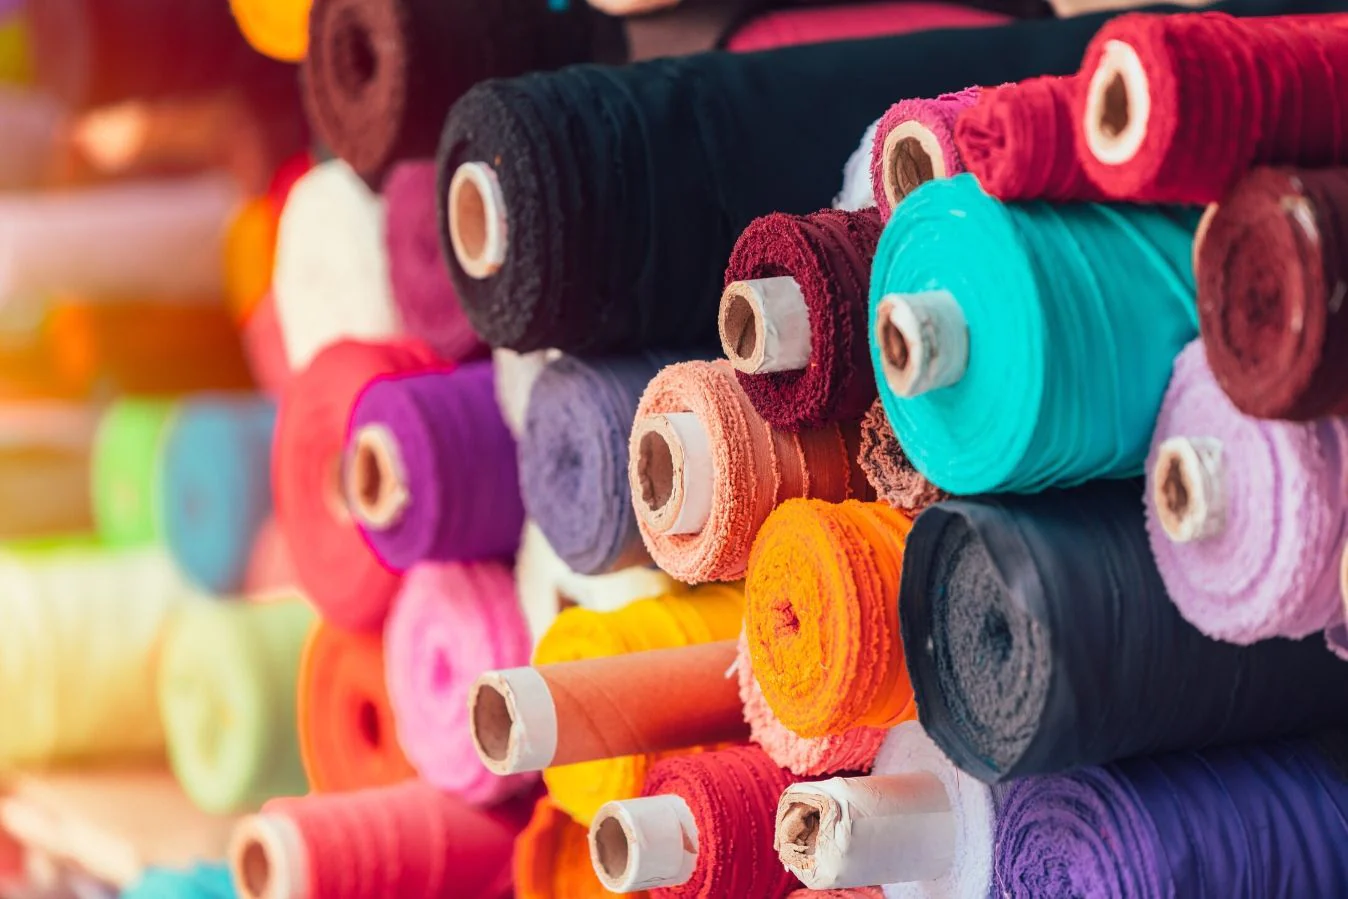 Pakistan’s textile exports recorded 8 pc decline in Aug 23